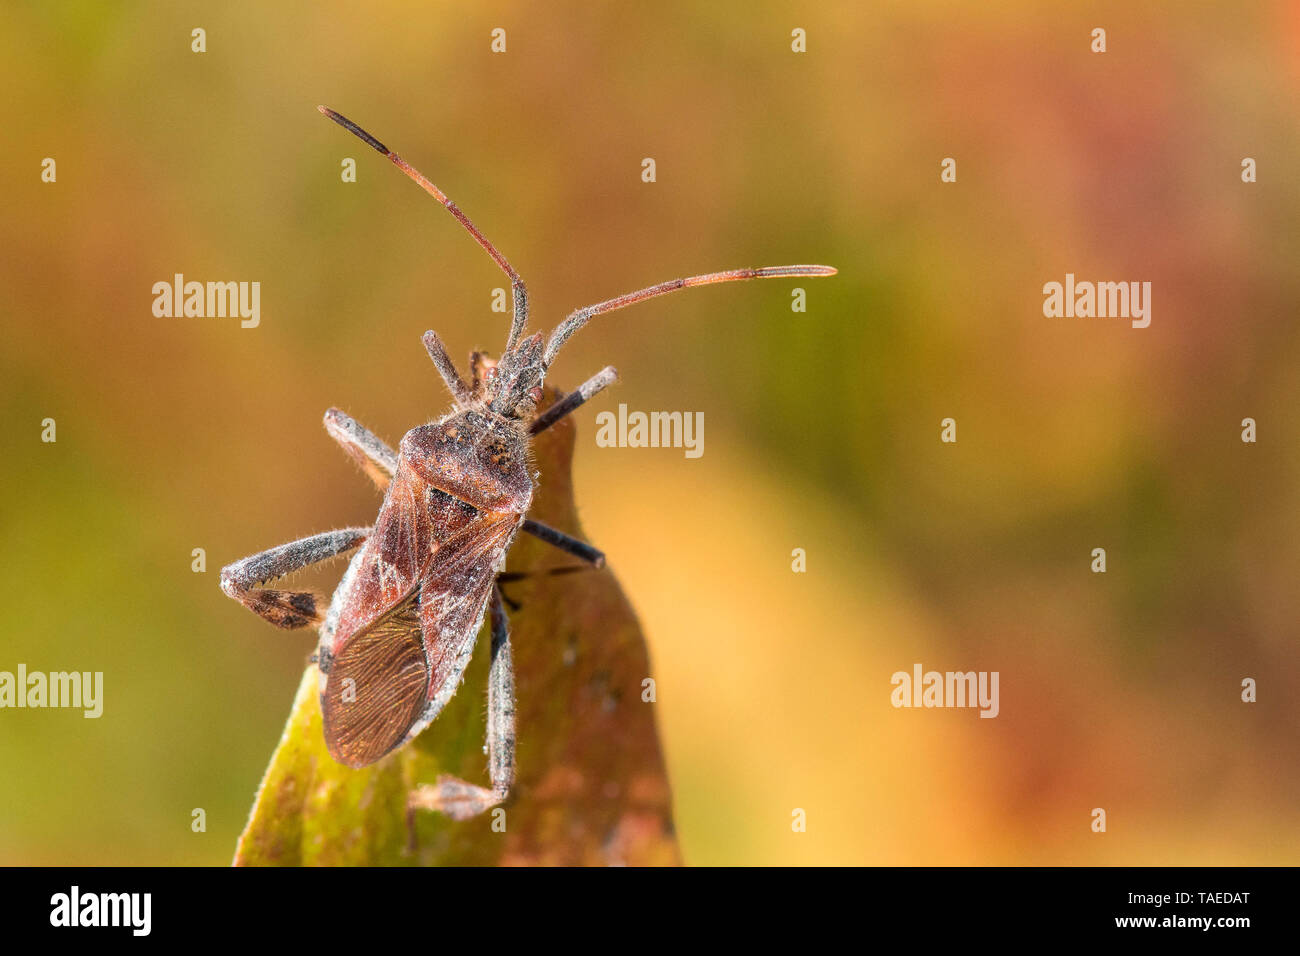 Western conifer seed bug (Leptoglossus occidentalis), invasive bug, Bouxieres aux dames, Lorraine, France Stock Photo